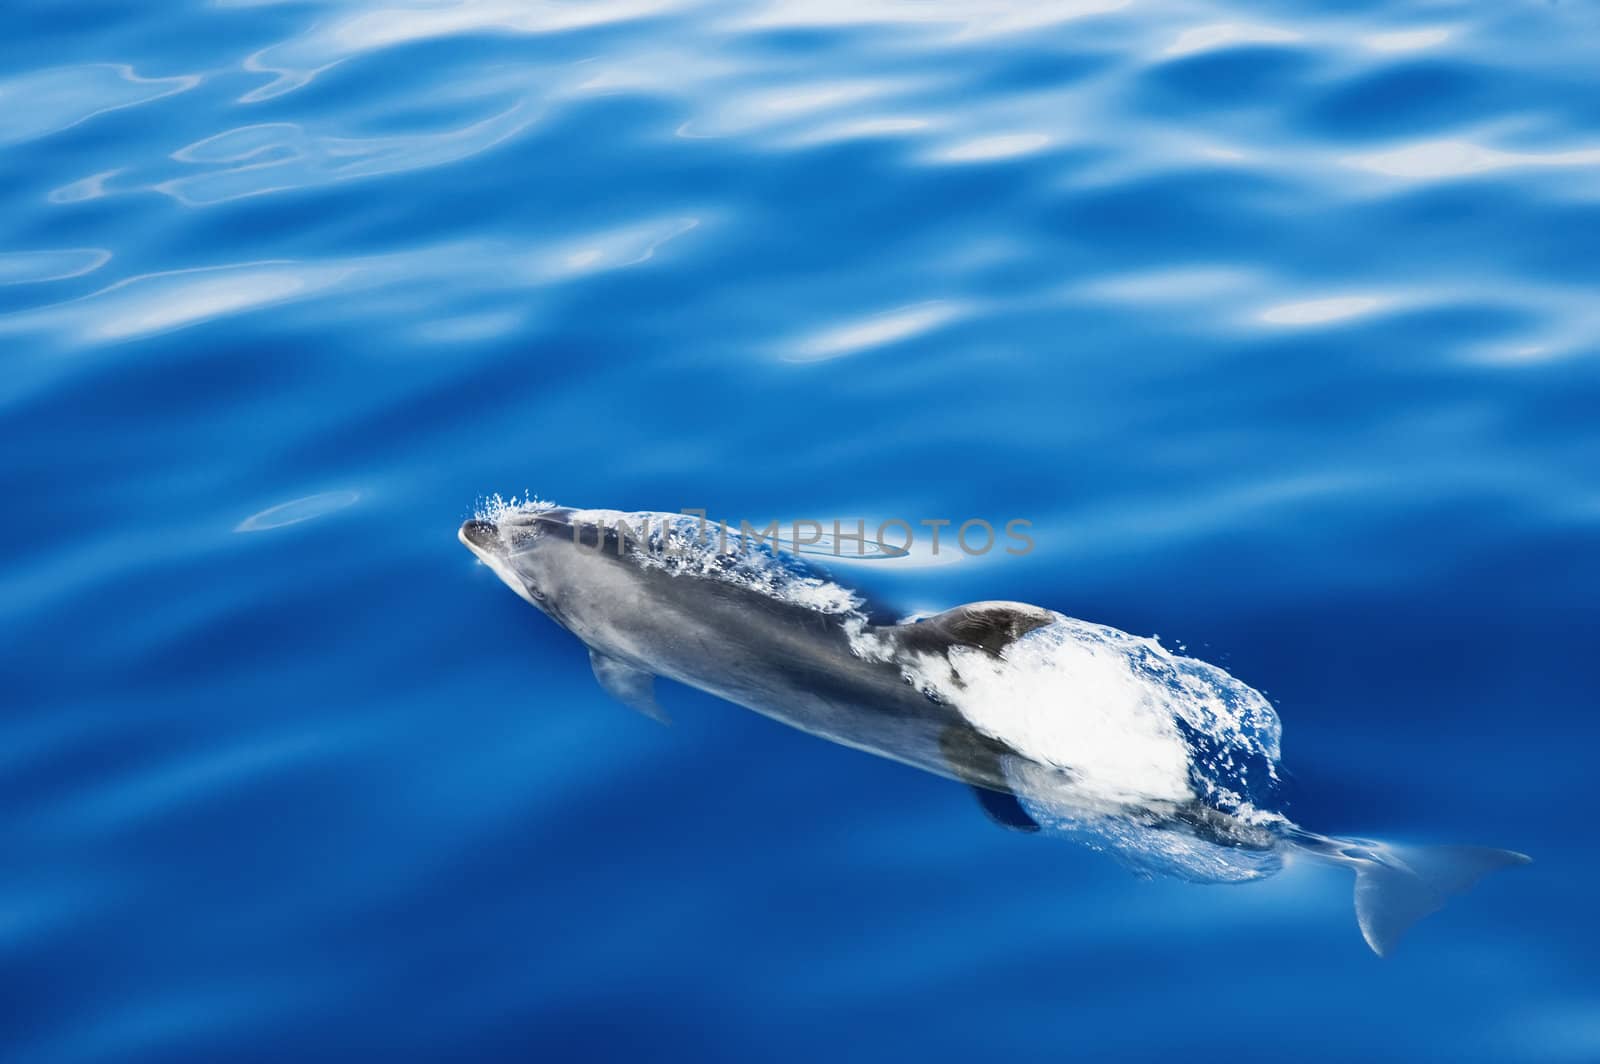 Common dolphin swimming at water surface, Pico island, Azores, Portugal
